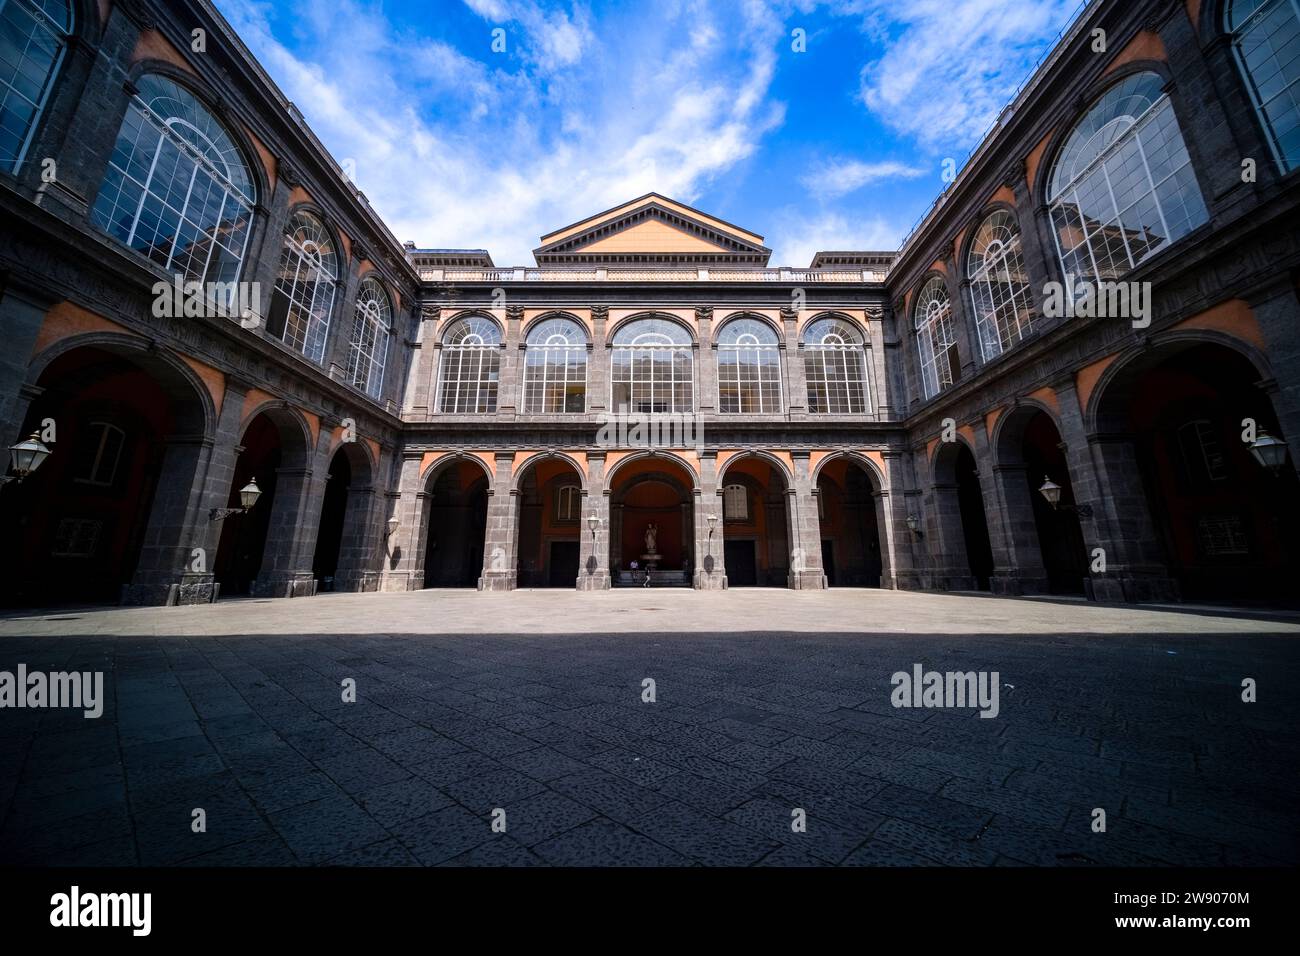 Inner courtyard of the Royal Palace of Naples, Palazzo Reale di Napoli, a historical tourist destination located in central Naples. Stock Photo